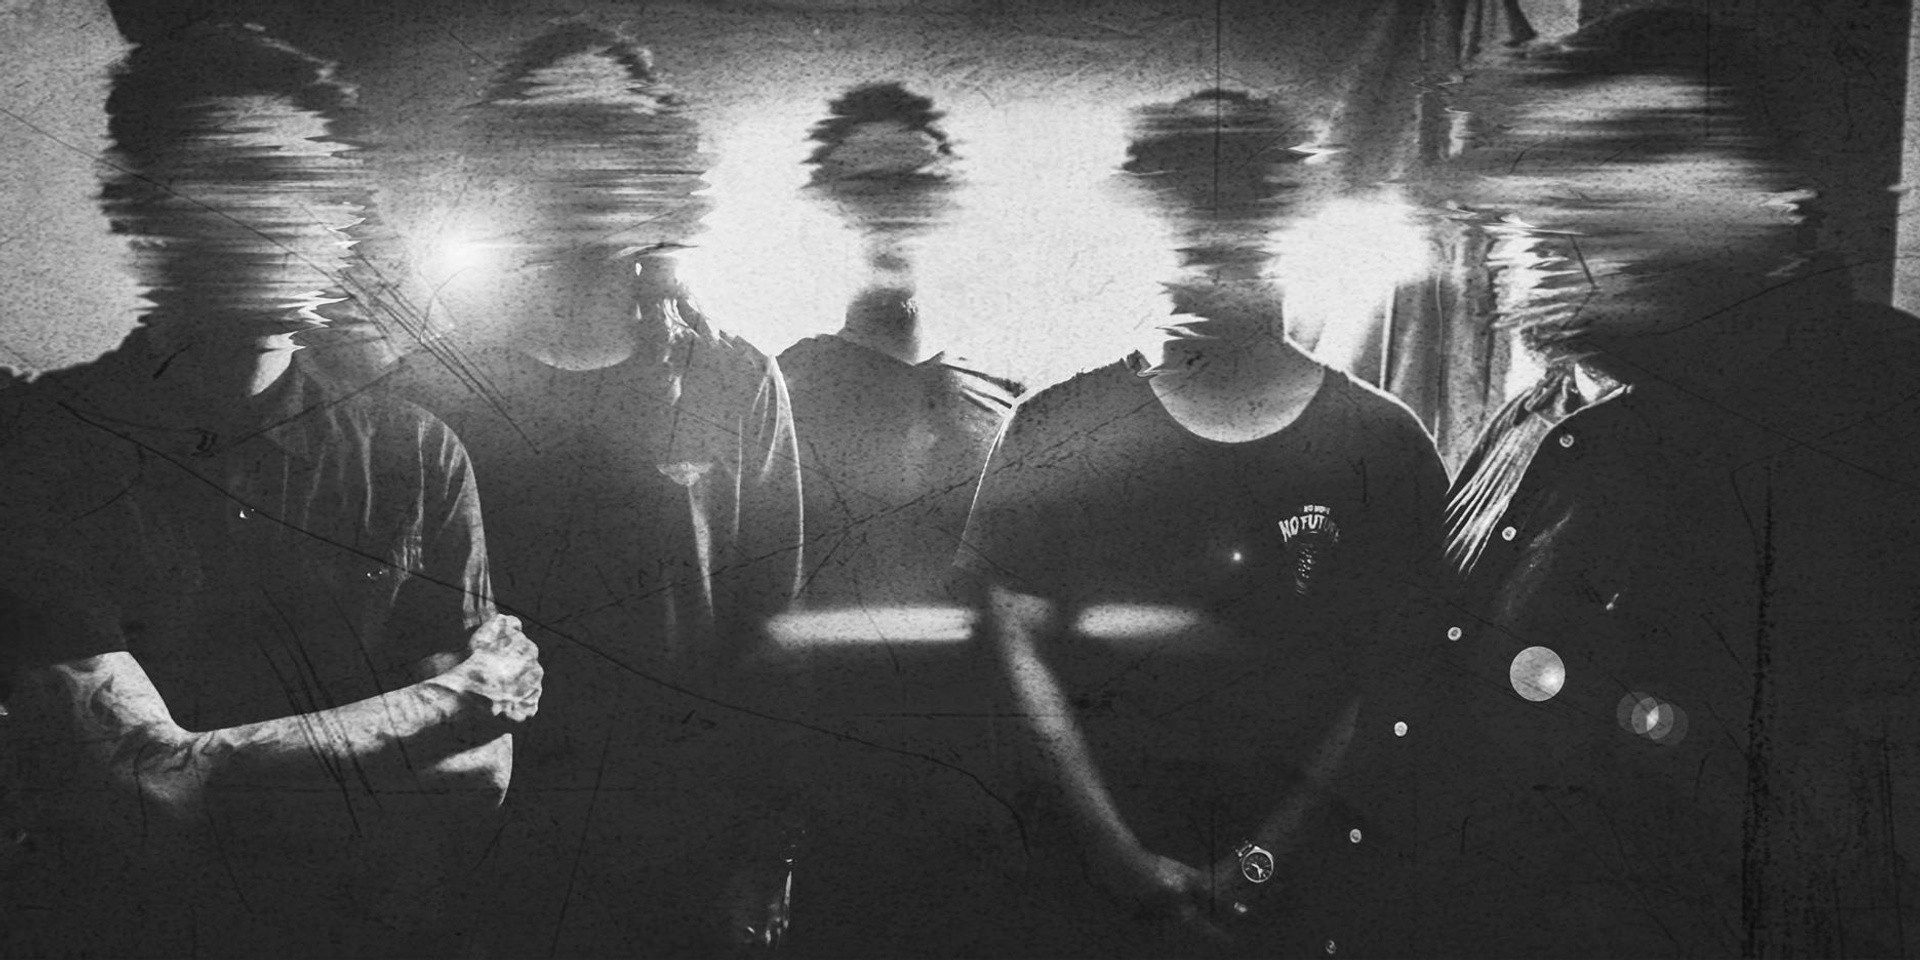 Fell the Mighty unveil debut EP Atrocities – listen